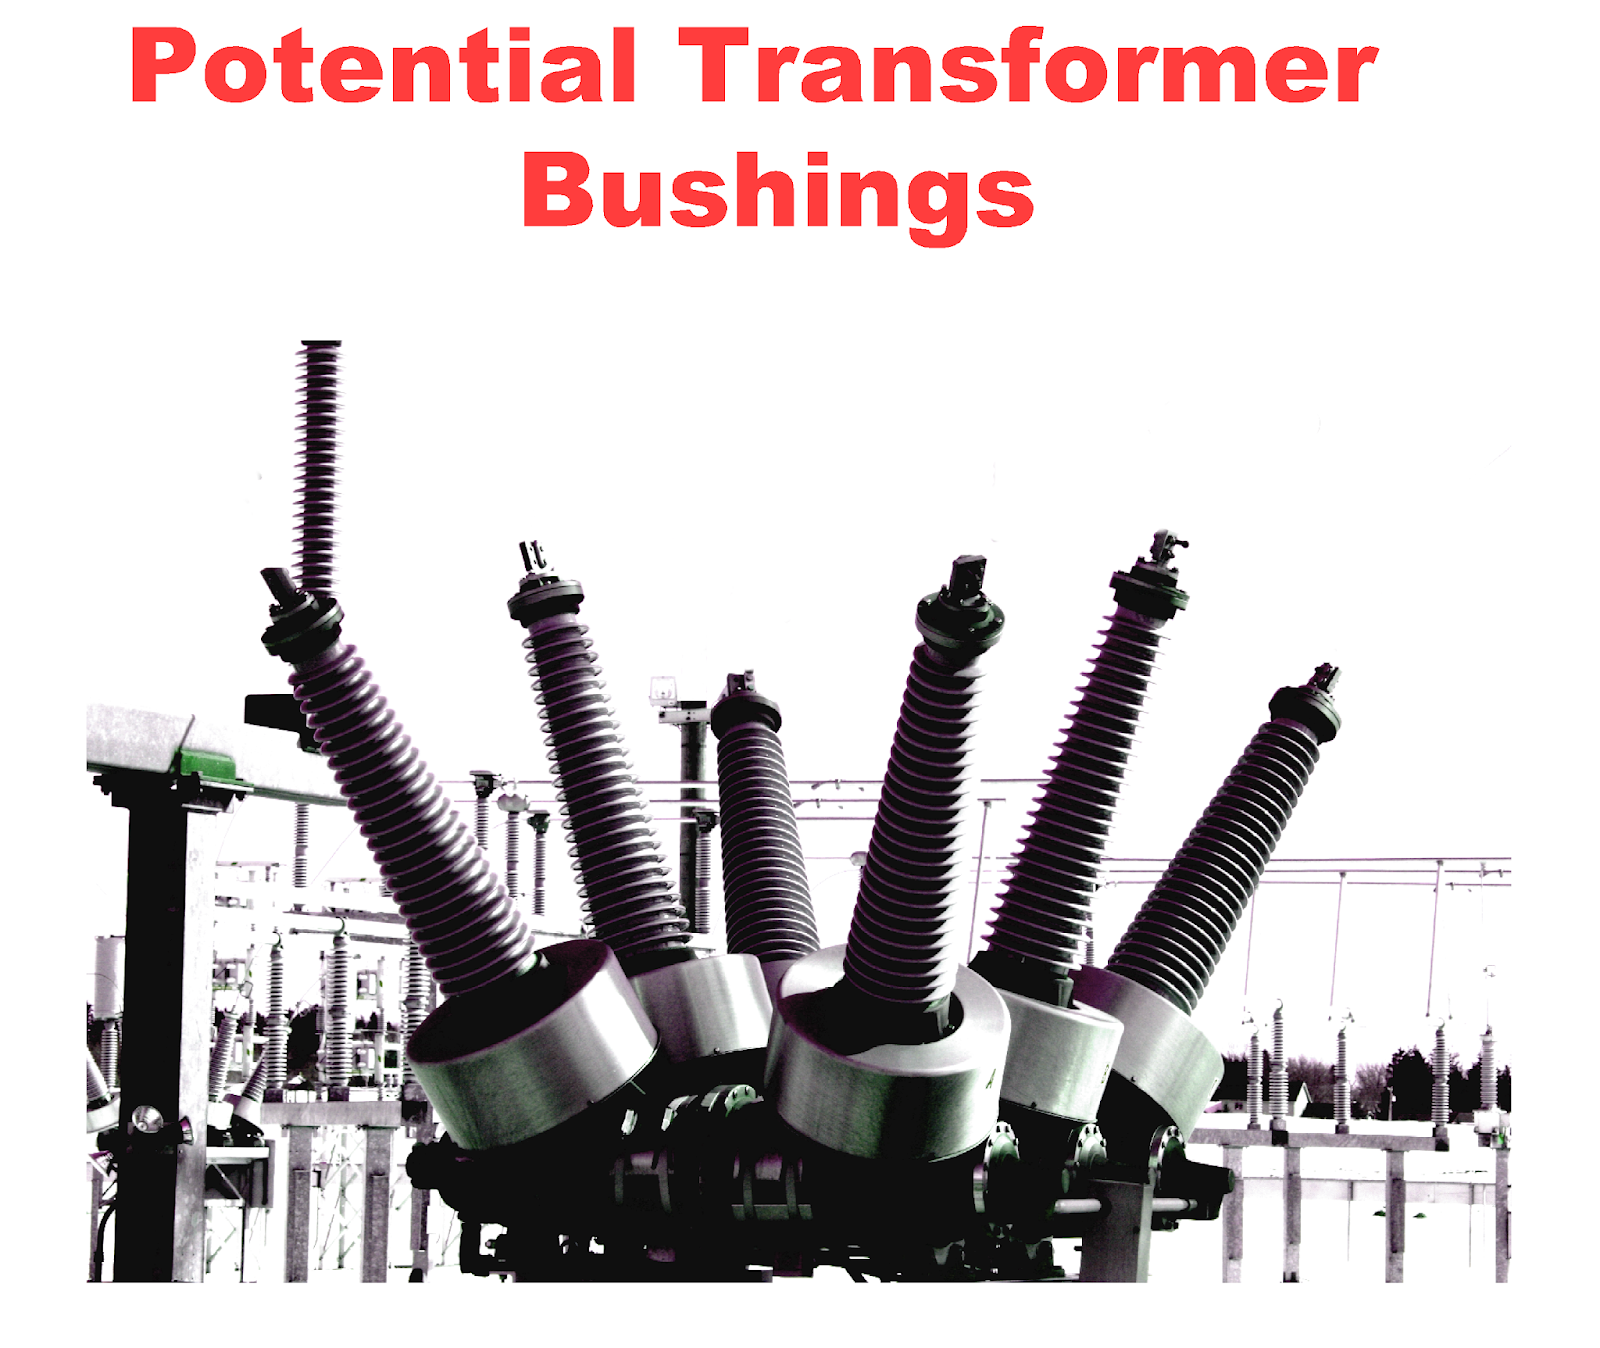 A transformer is used